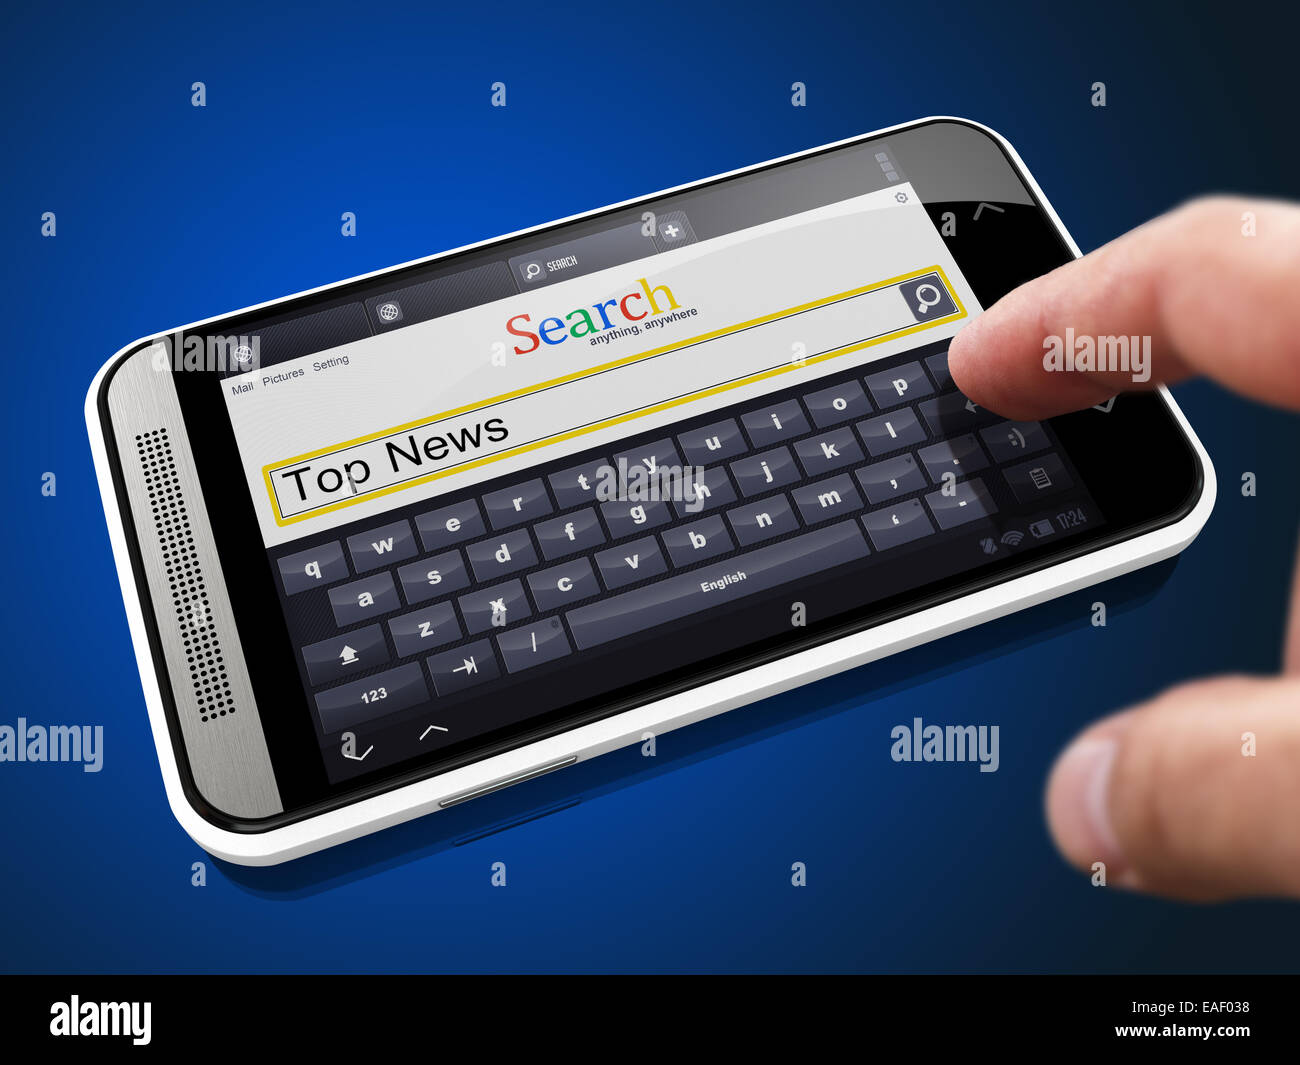 Top News - Search String on Smartphone. Stock Photo